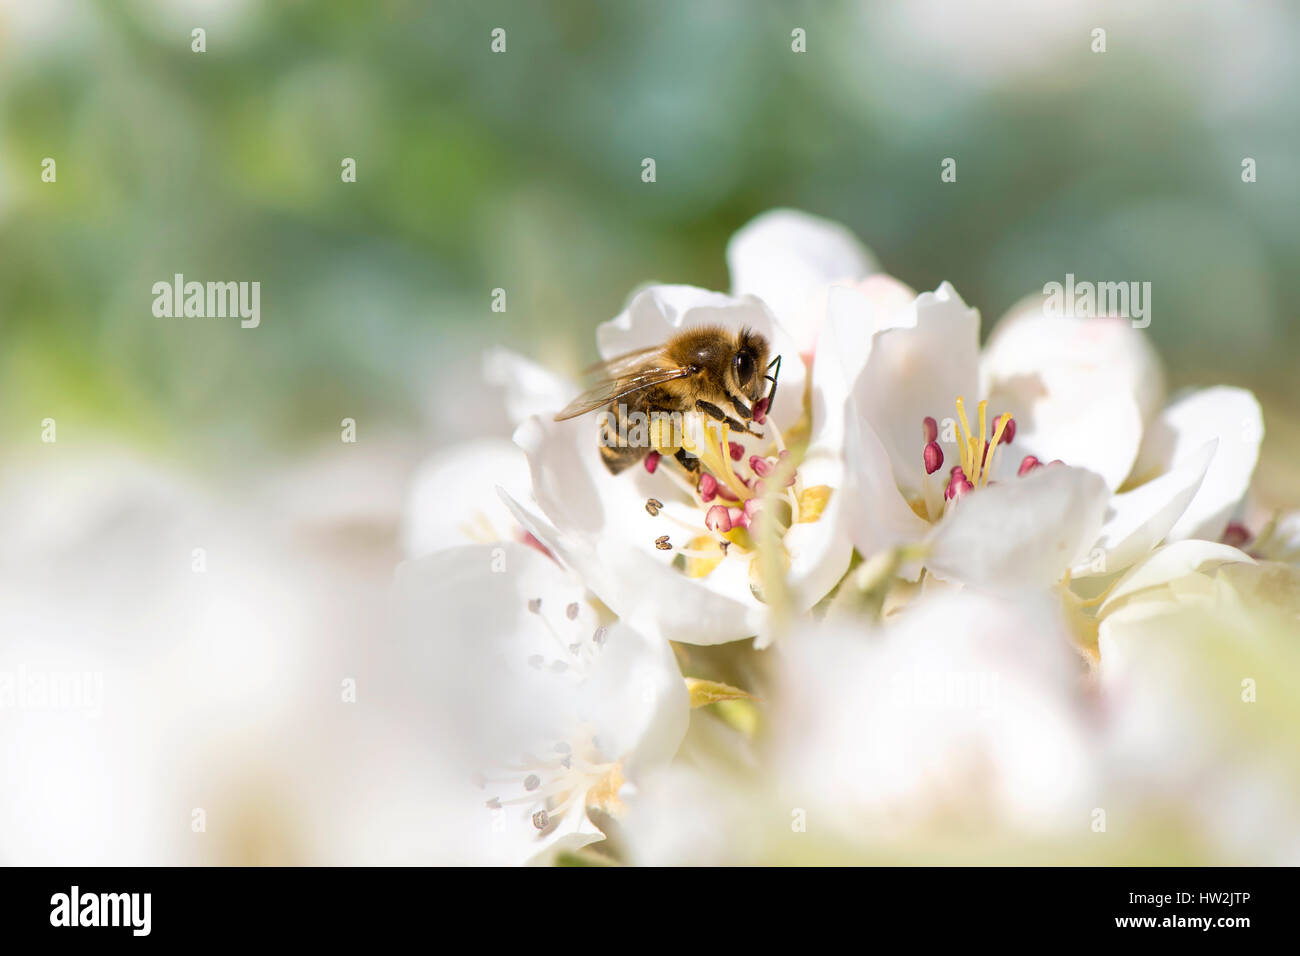 Close-up image of a Honey Bee collecting pollen from spring, white Pear tree blossom flowers, taken against a soft background Stock Photo